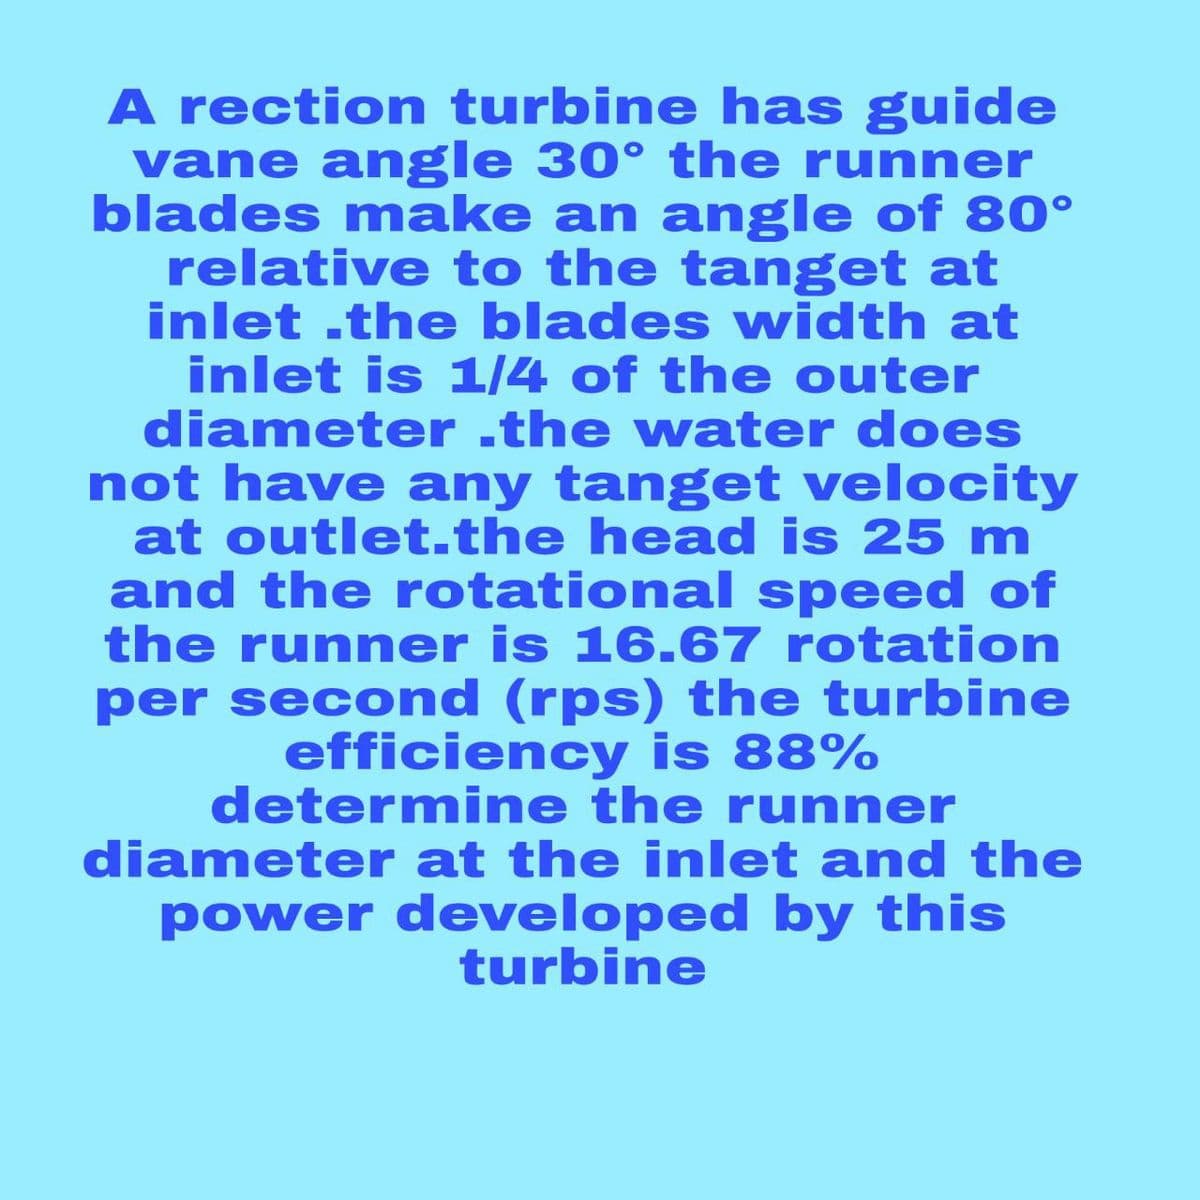 A rection turbine has guide
vane angle 30° the runner
blades make an angle of 80°
relative to the tanget at
inlet .the blades width at
inlet is 1/4 of the outer
diameter .the water does
not have any tanget velocity
at outlet.the head is 25 m
and the rotational speed of
the runner is 16.67 rotation
per second (rps) the turbine
efficiency is 88%
determine the runner
diameter at the inlet and the
power developed by this
turbine
